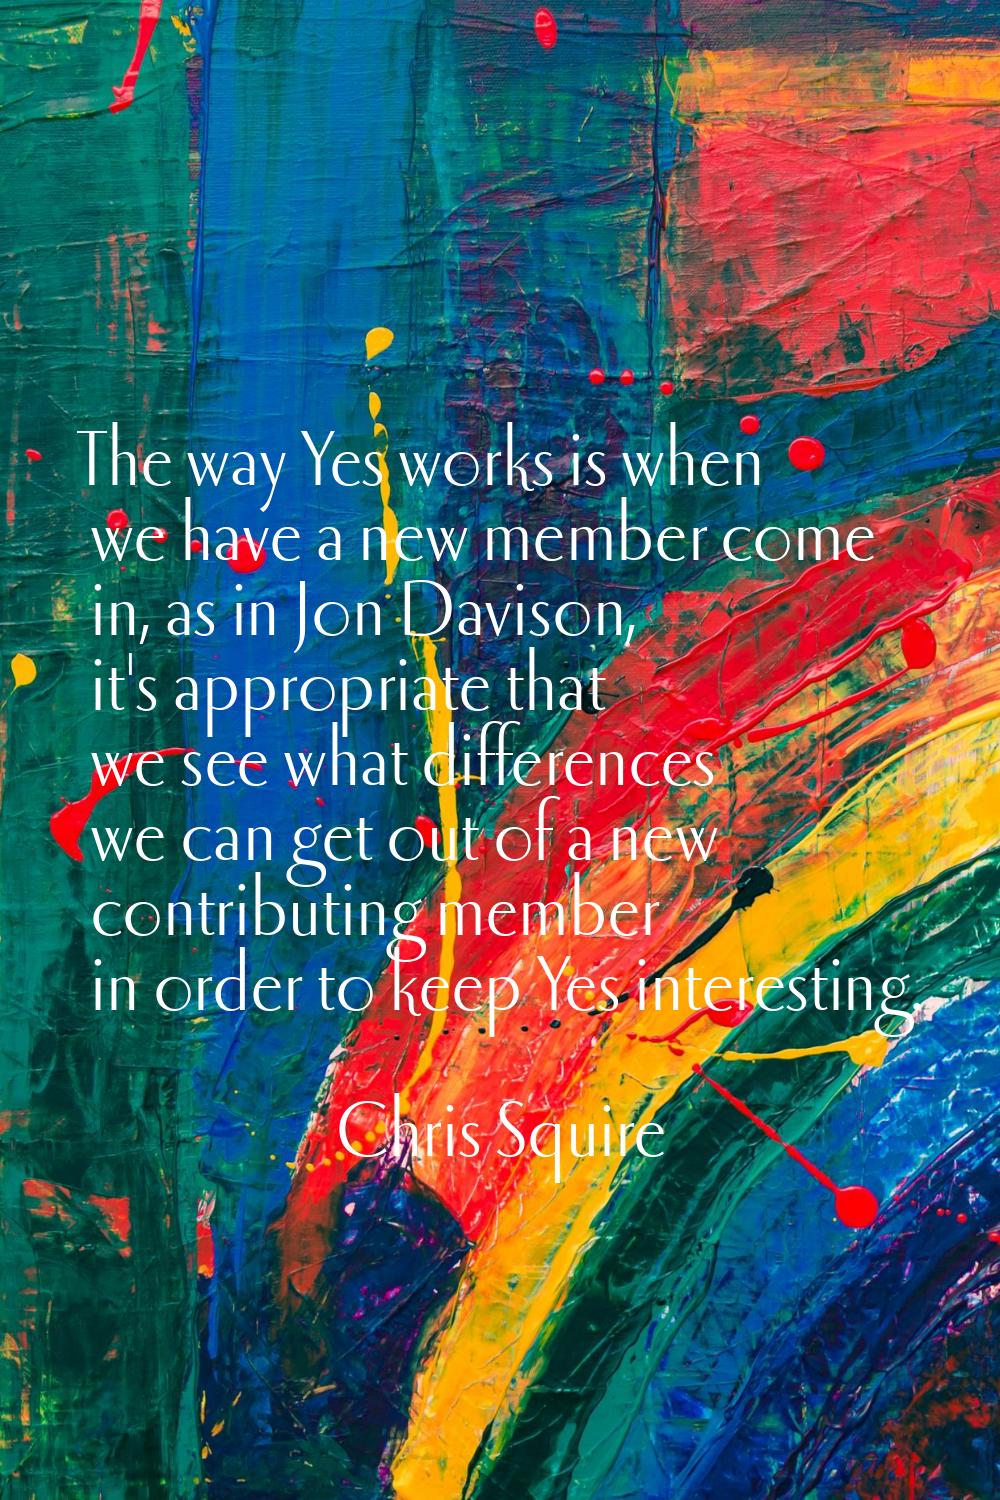 The way Yes works is when we have a new member come in, as in Jon Davison, it's appropriate that we